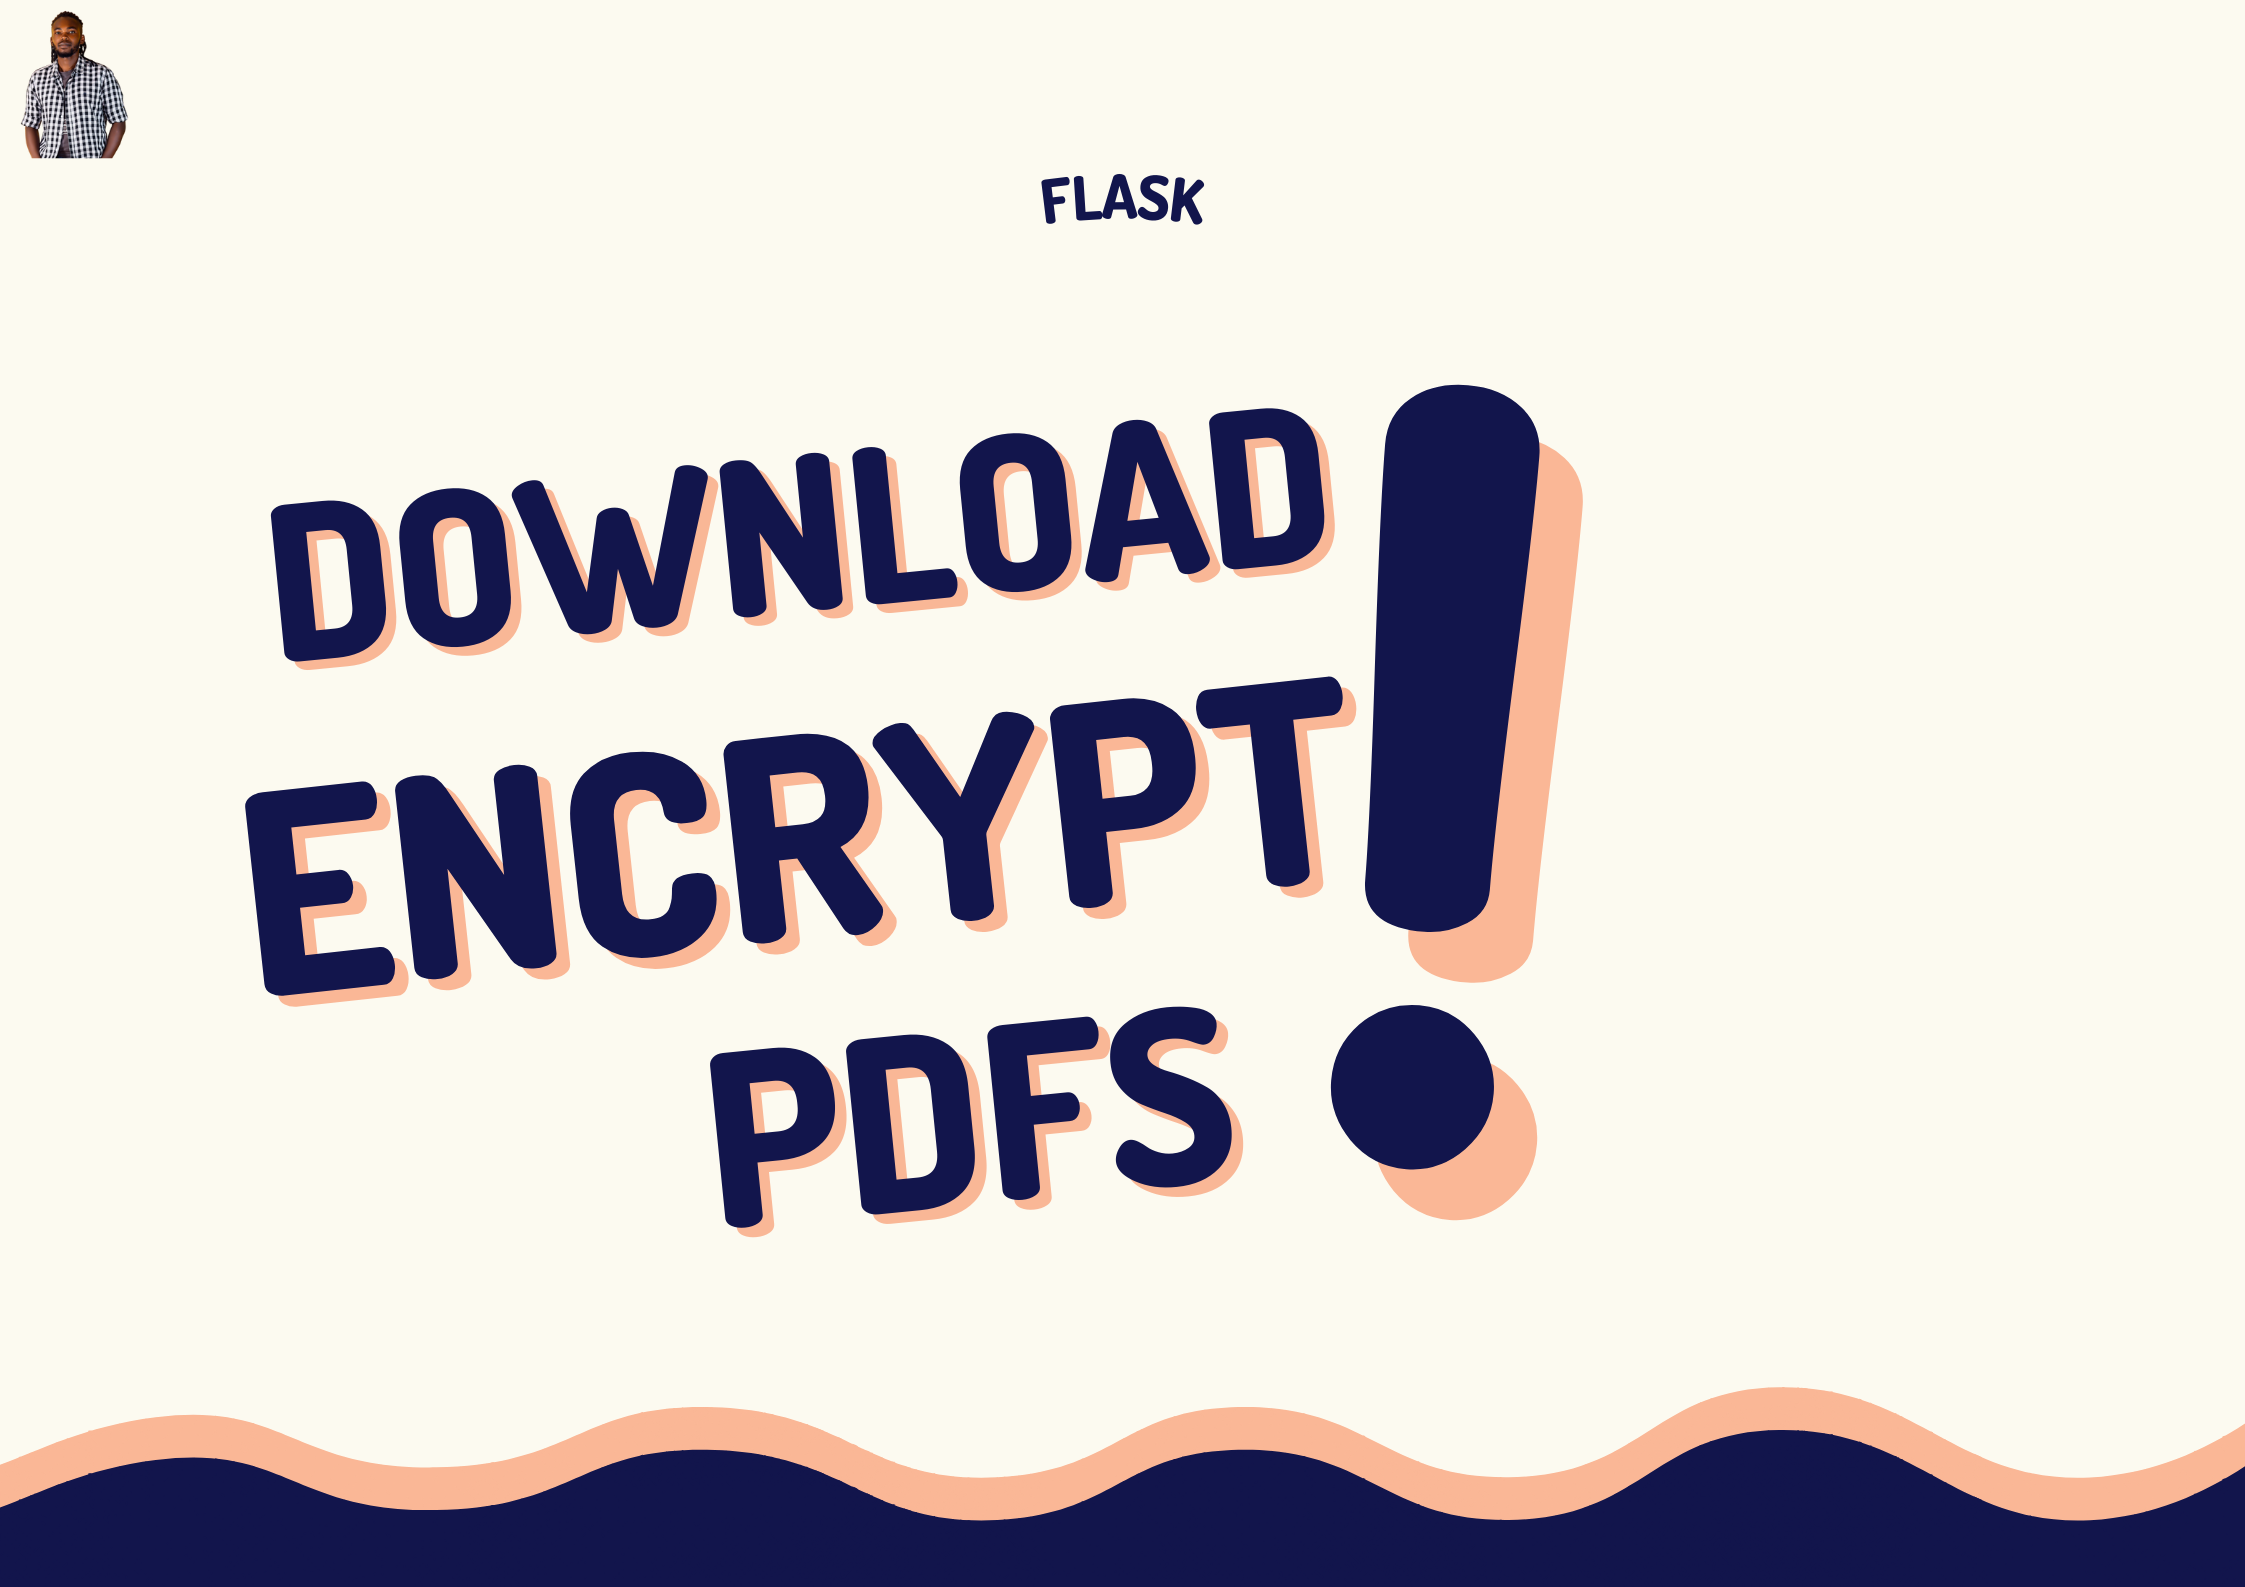 Download and Encrypt PDFs in Flask